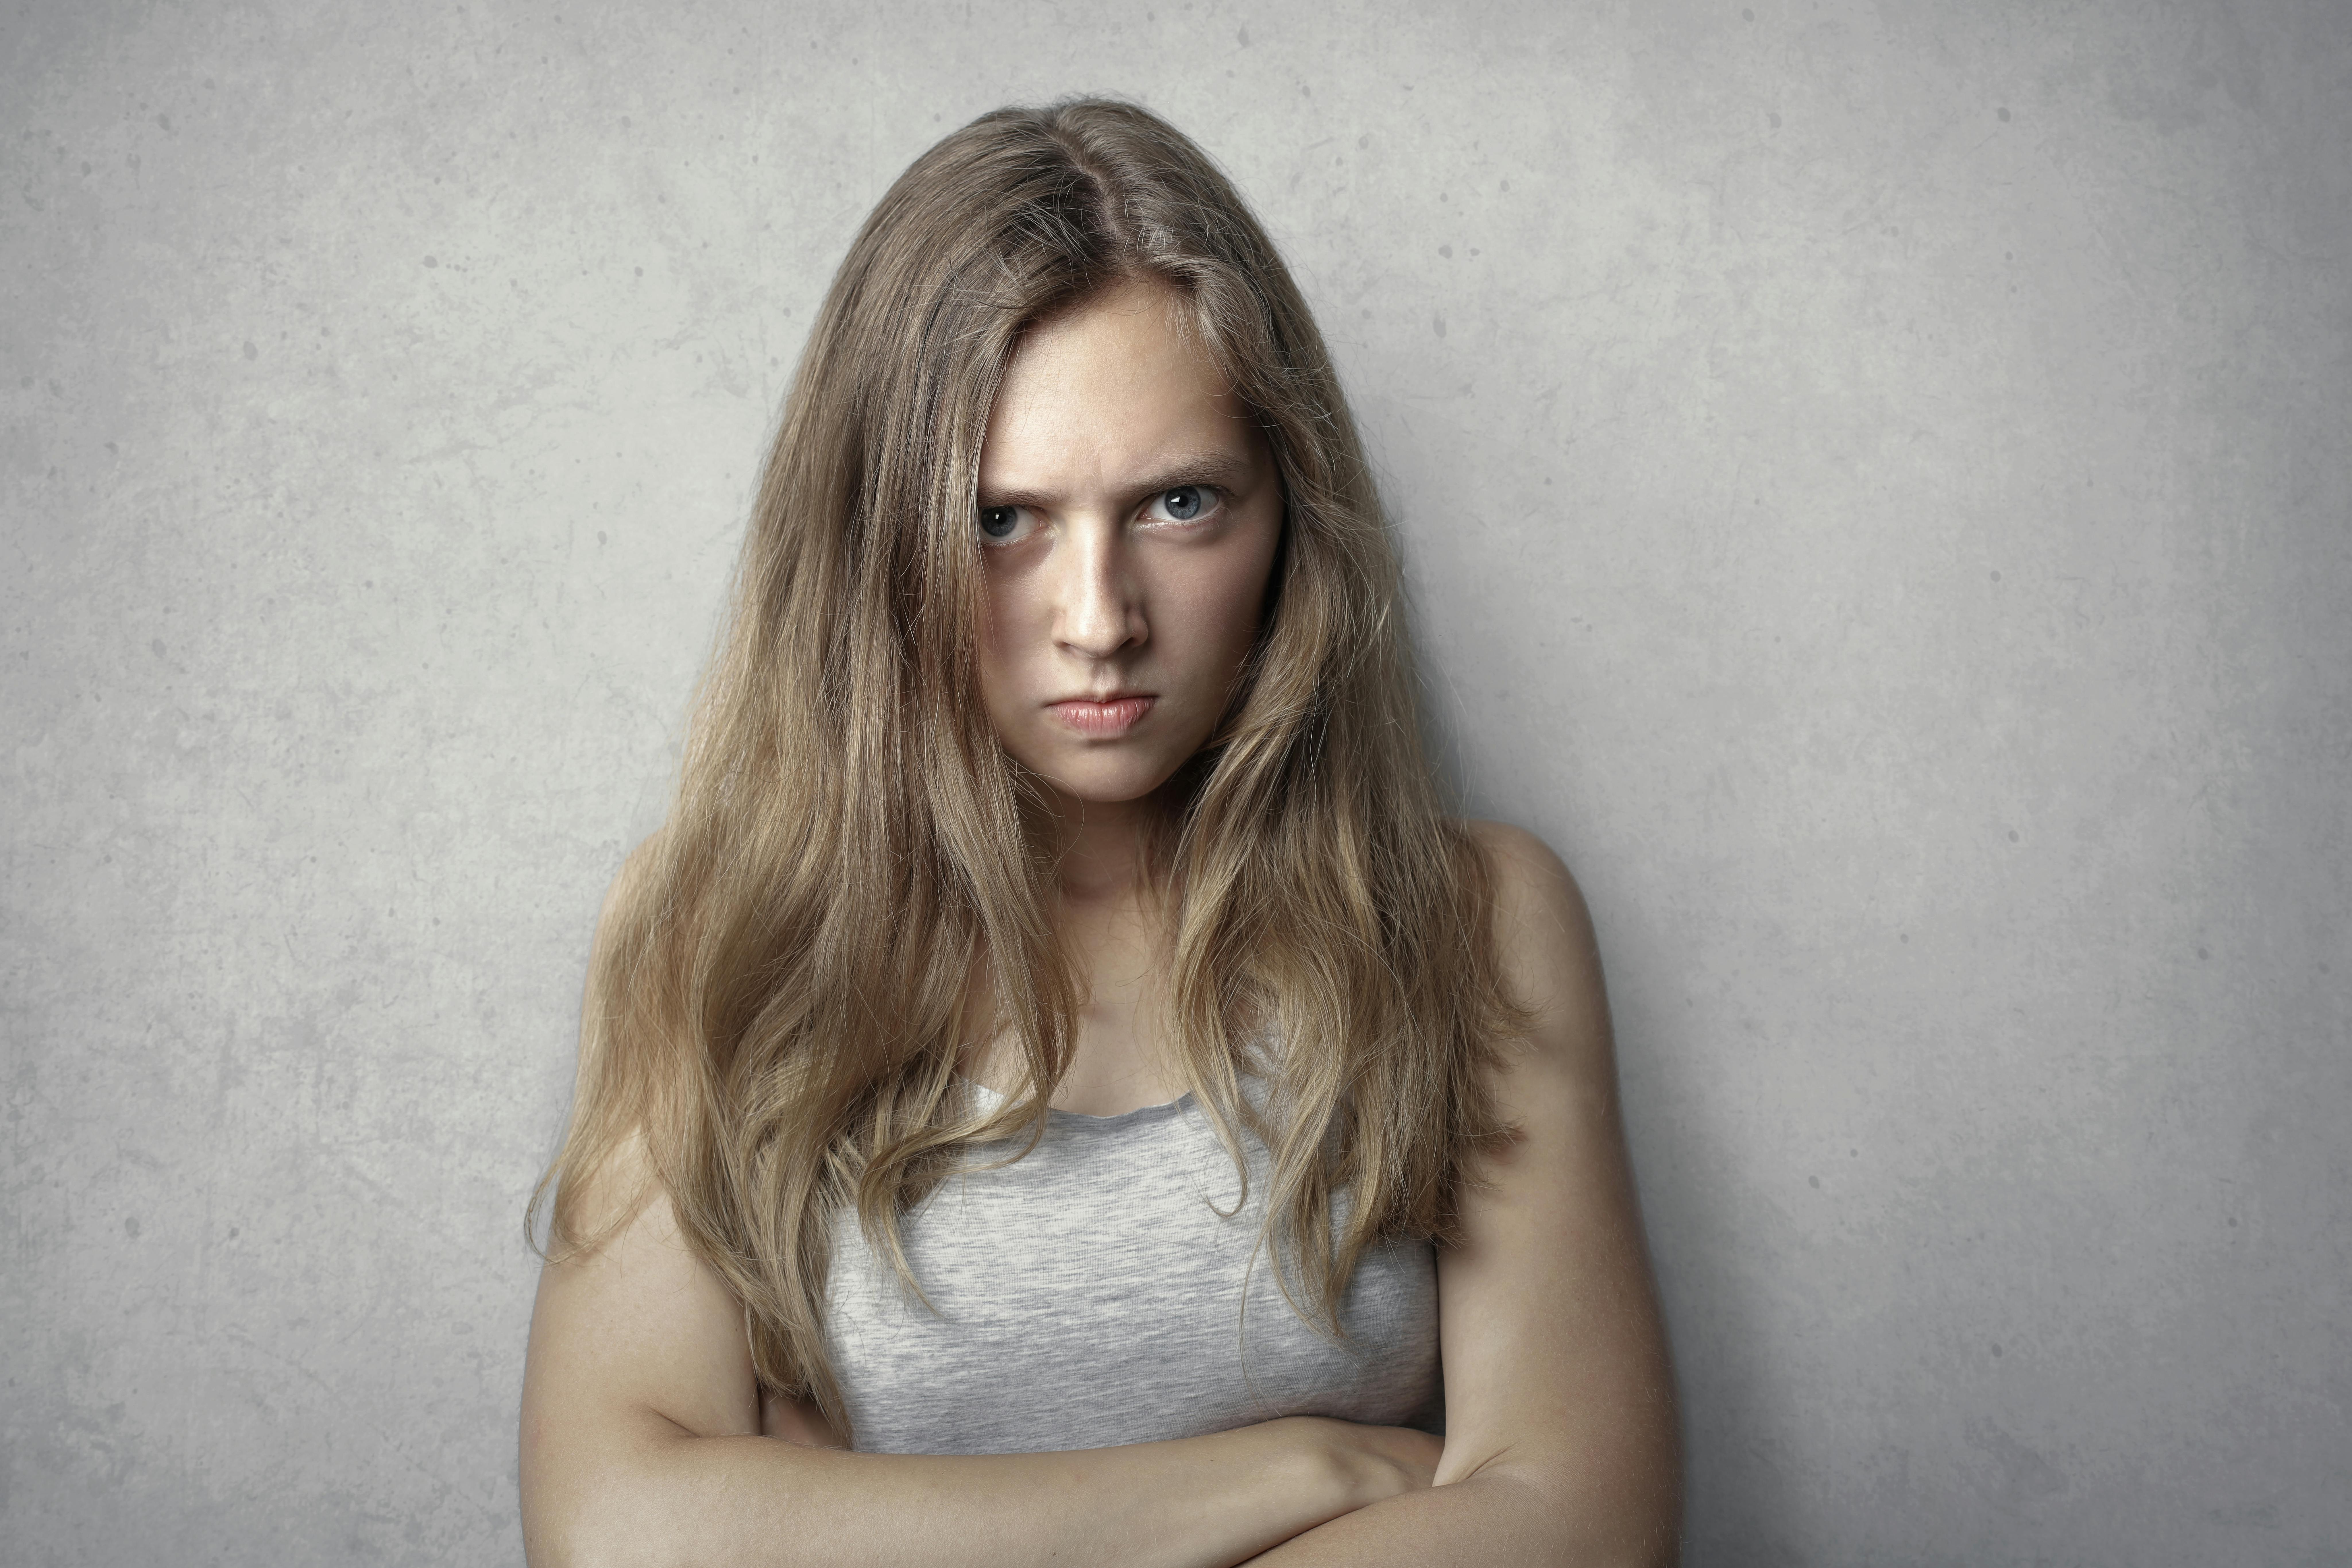 An angry woman with her arms crossed | Source: Pexels